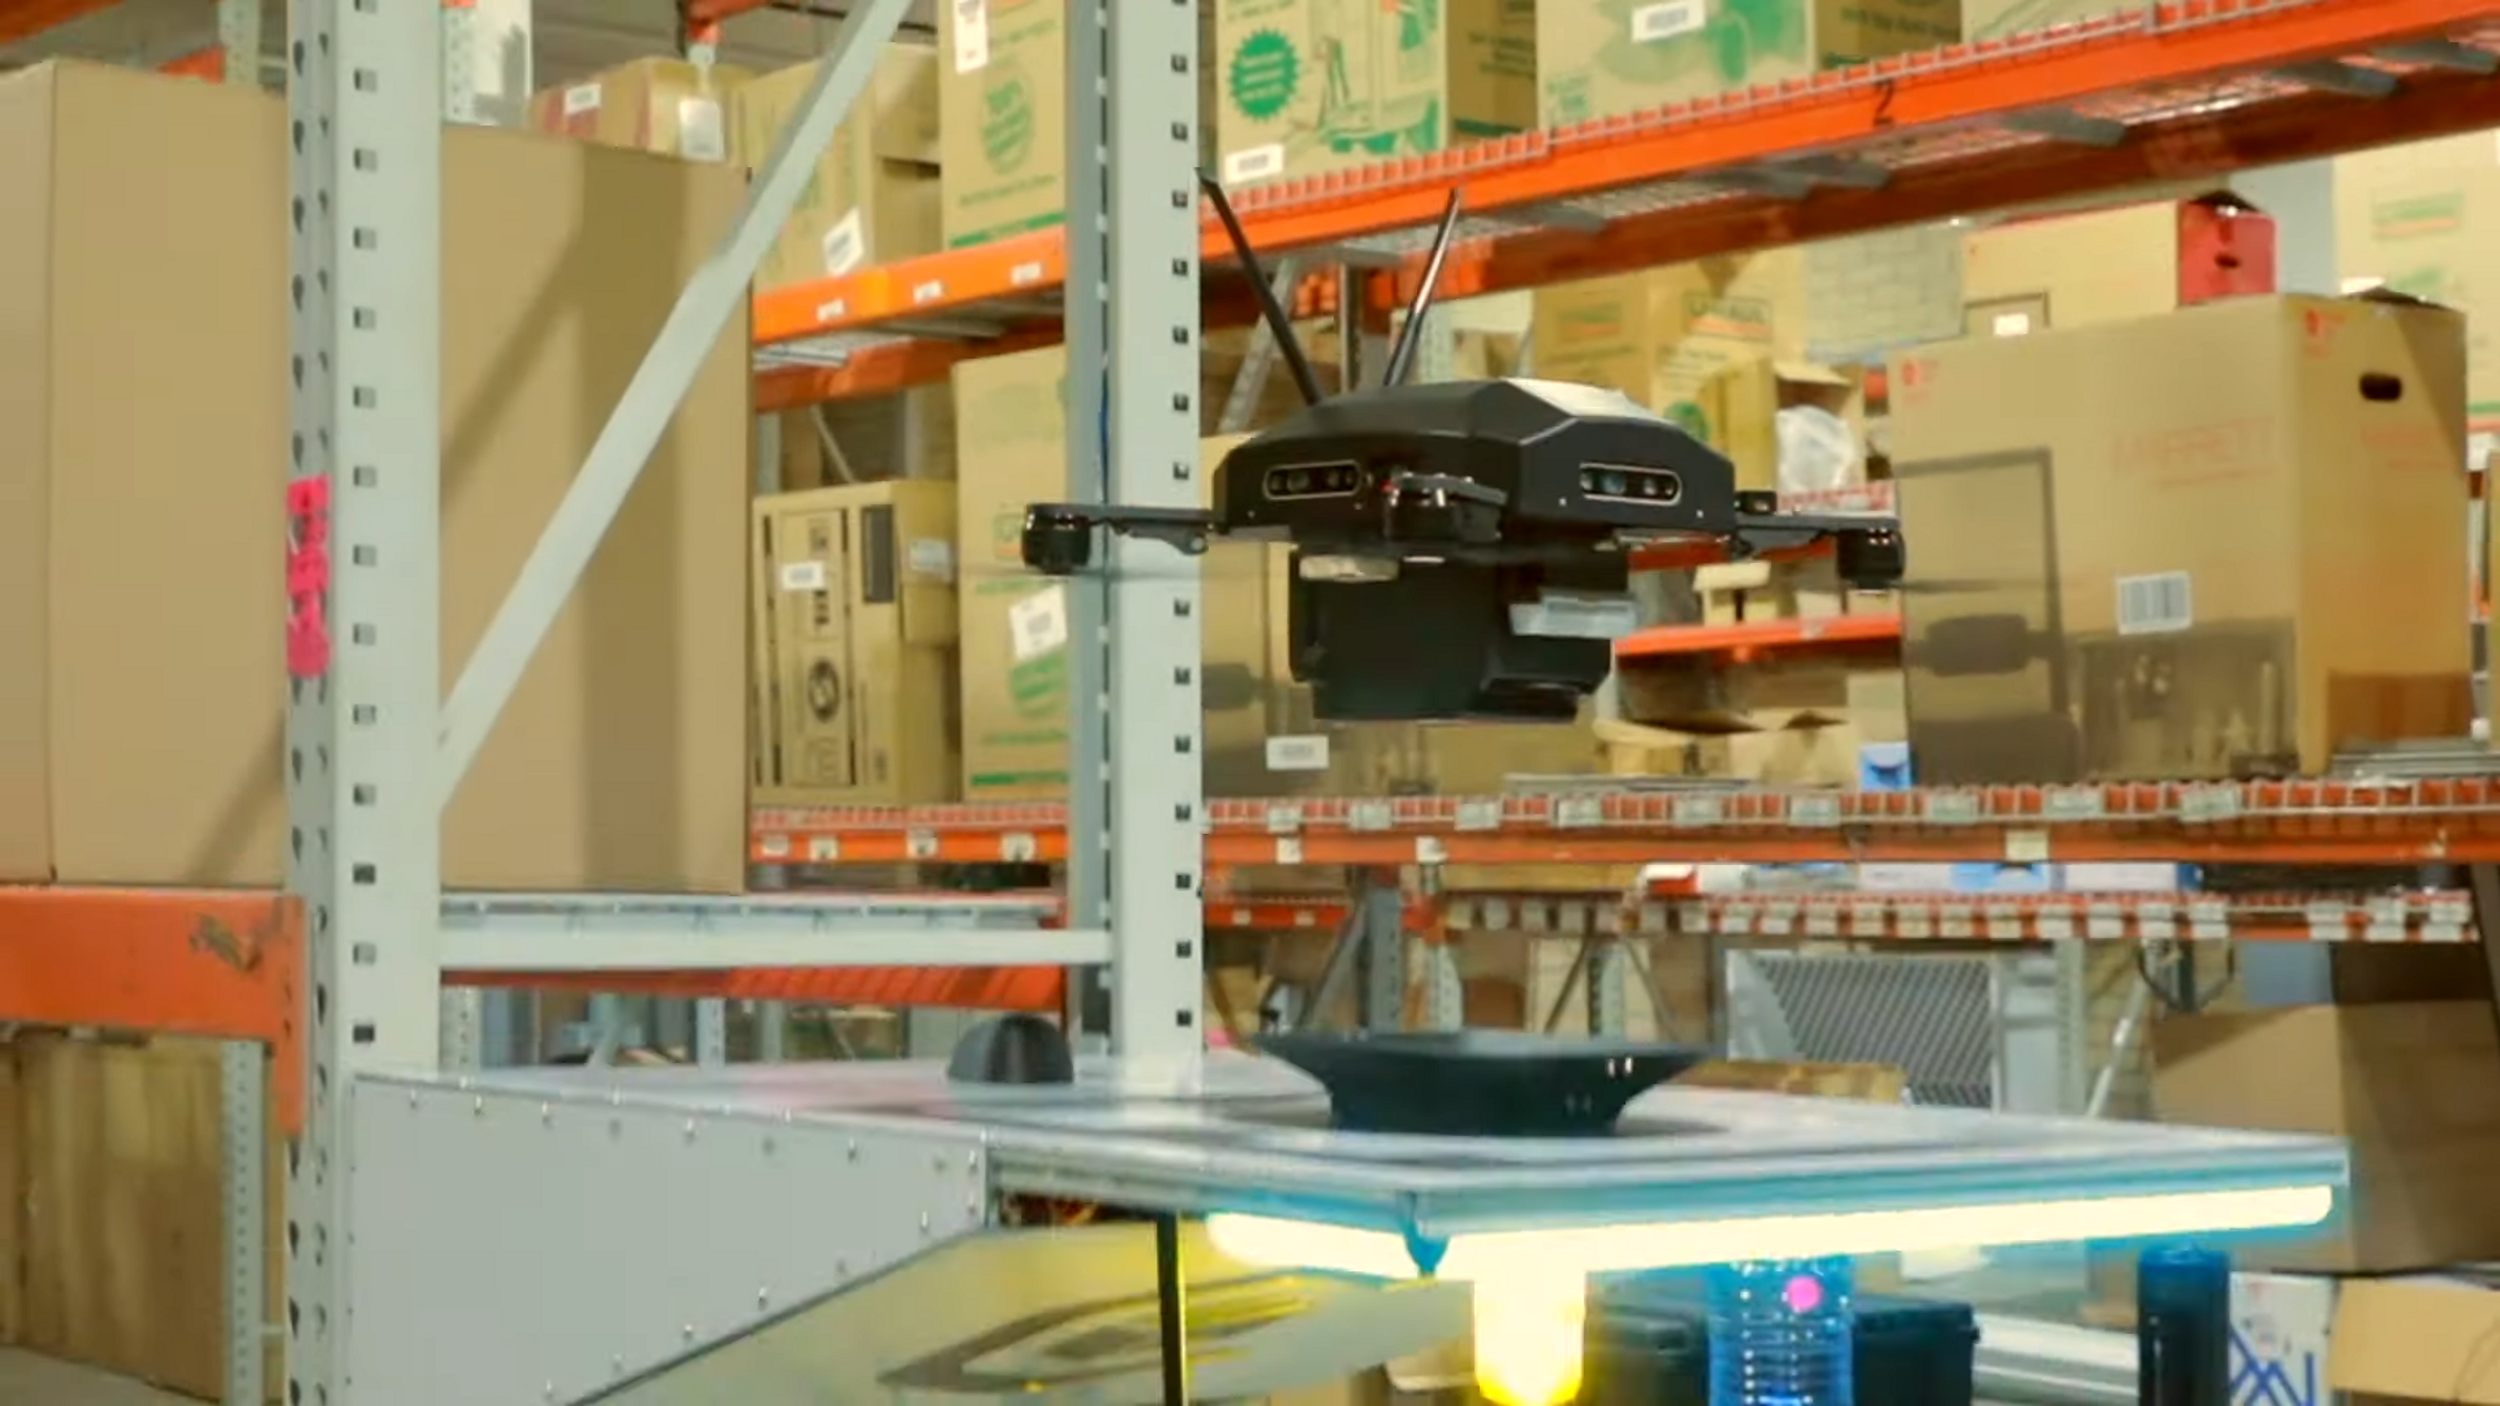 Drone flying in a warehouse